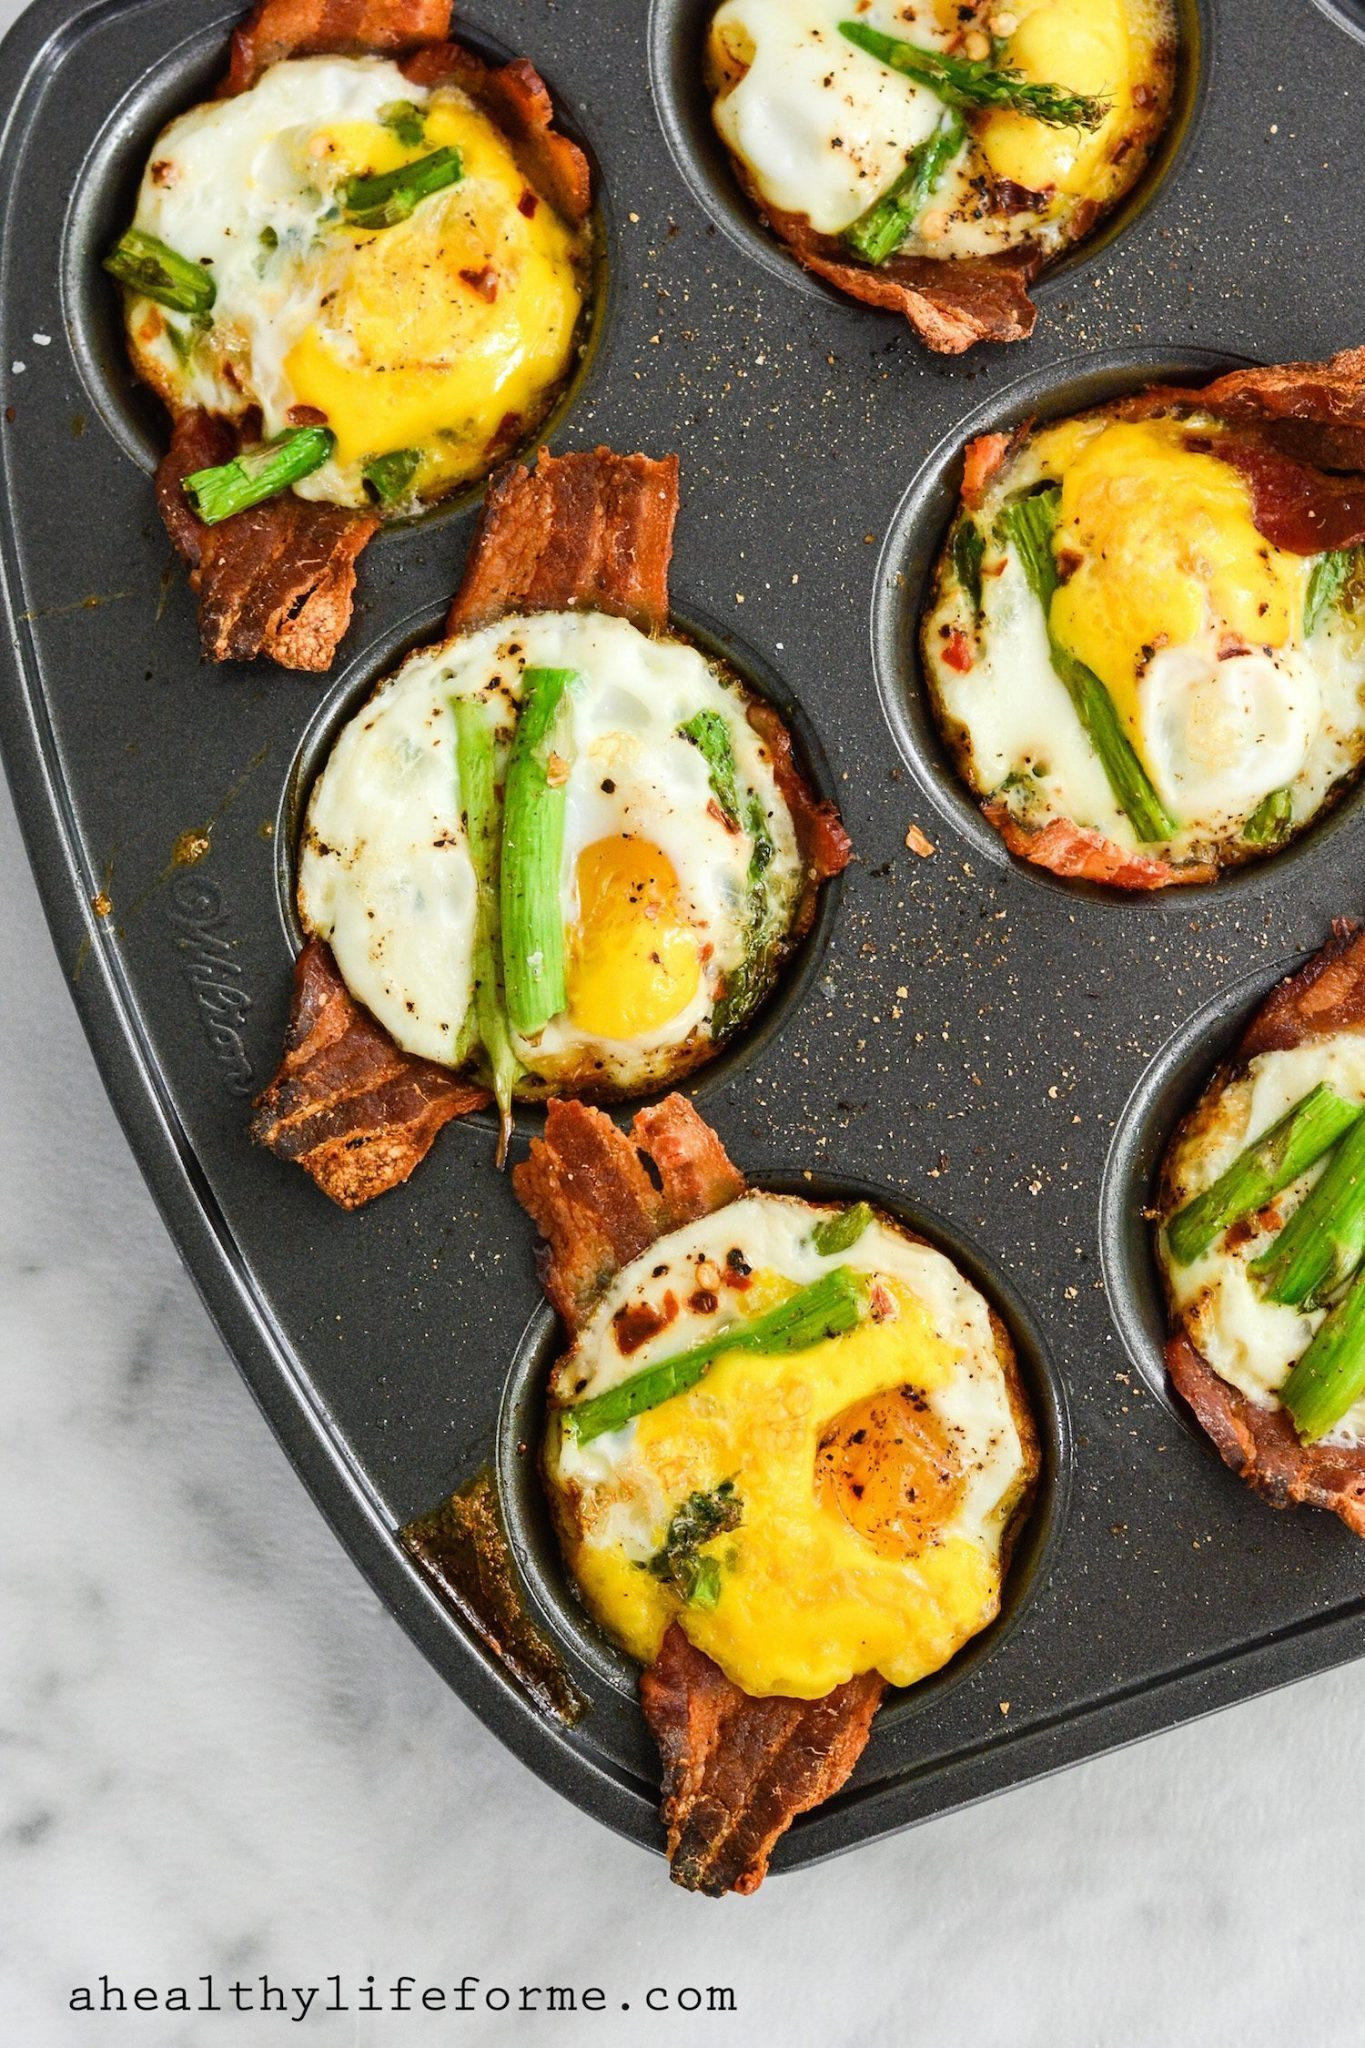 Paleo Breakfast Recipe
 Paleo Egg Cups A Healthy Life For Me